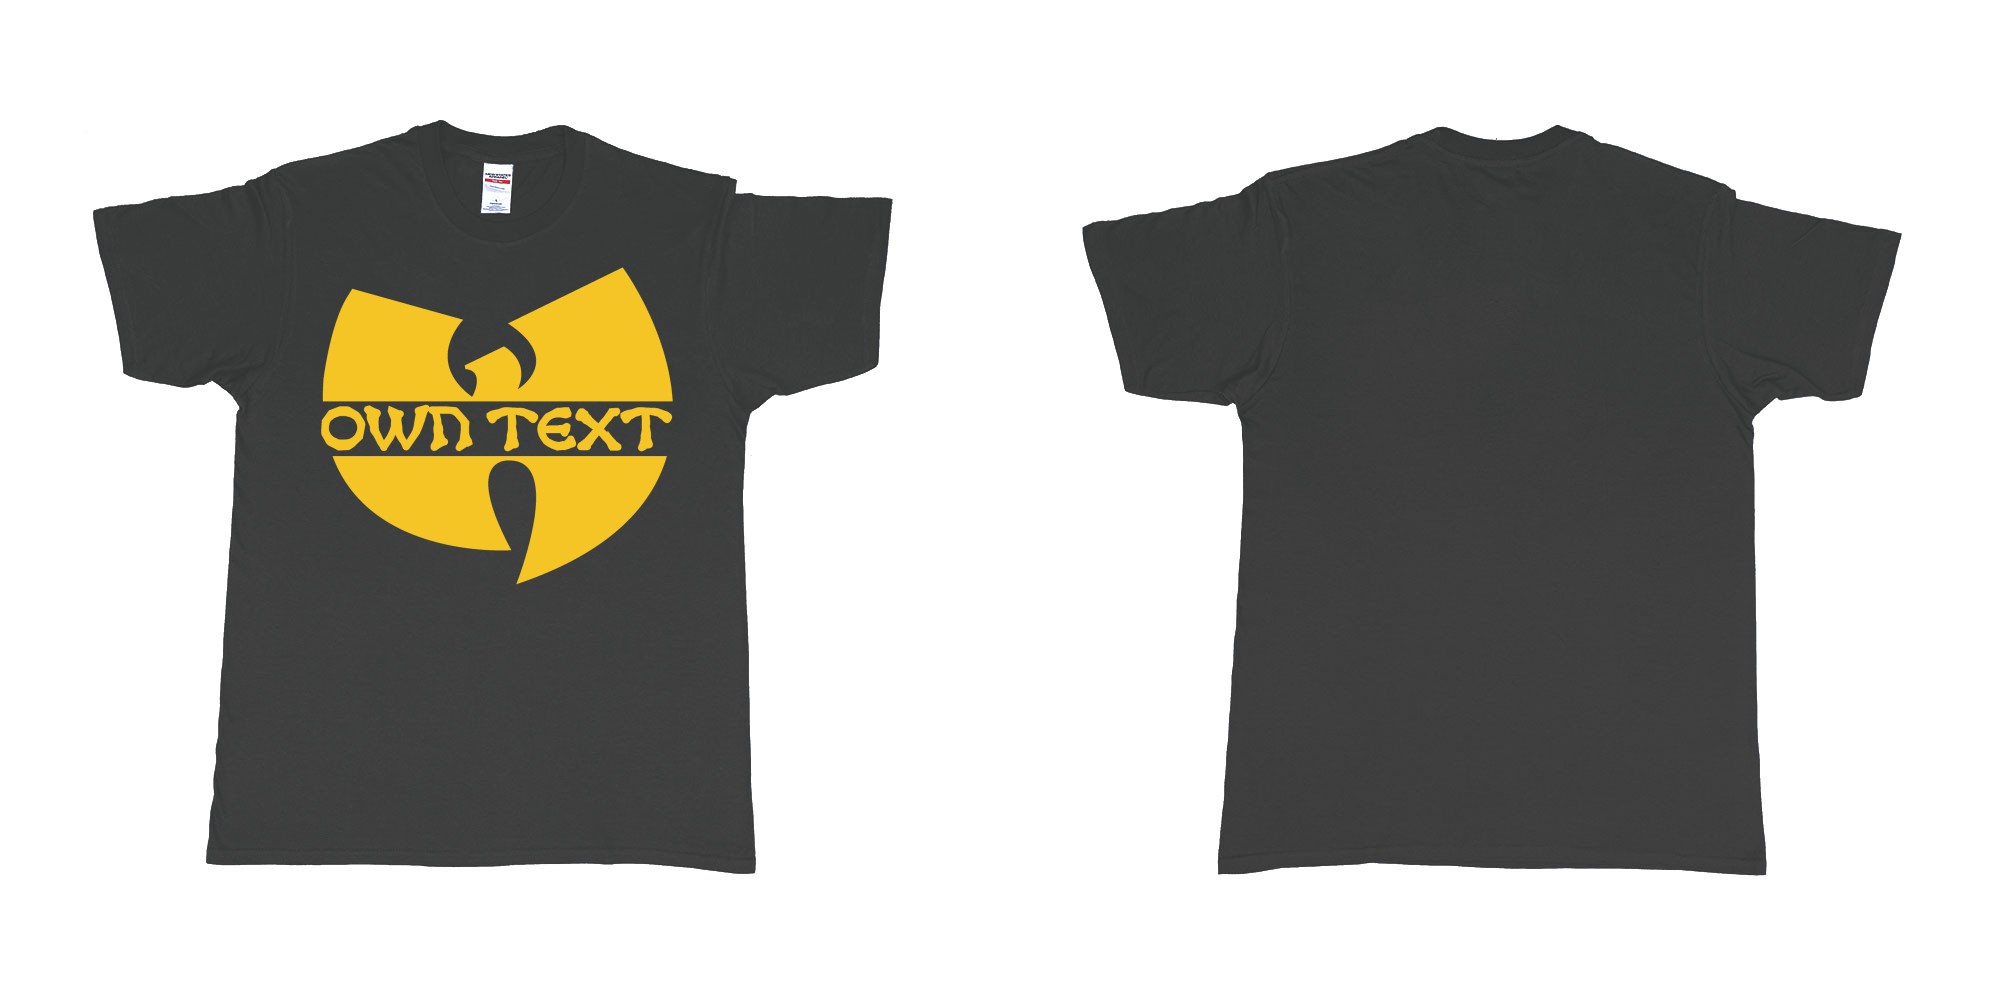 Custom tshirt design wu tang clan logo in fabric color black choice your own text made in Bali by The Pirate Way